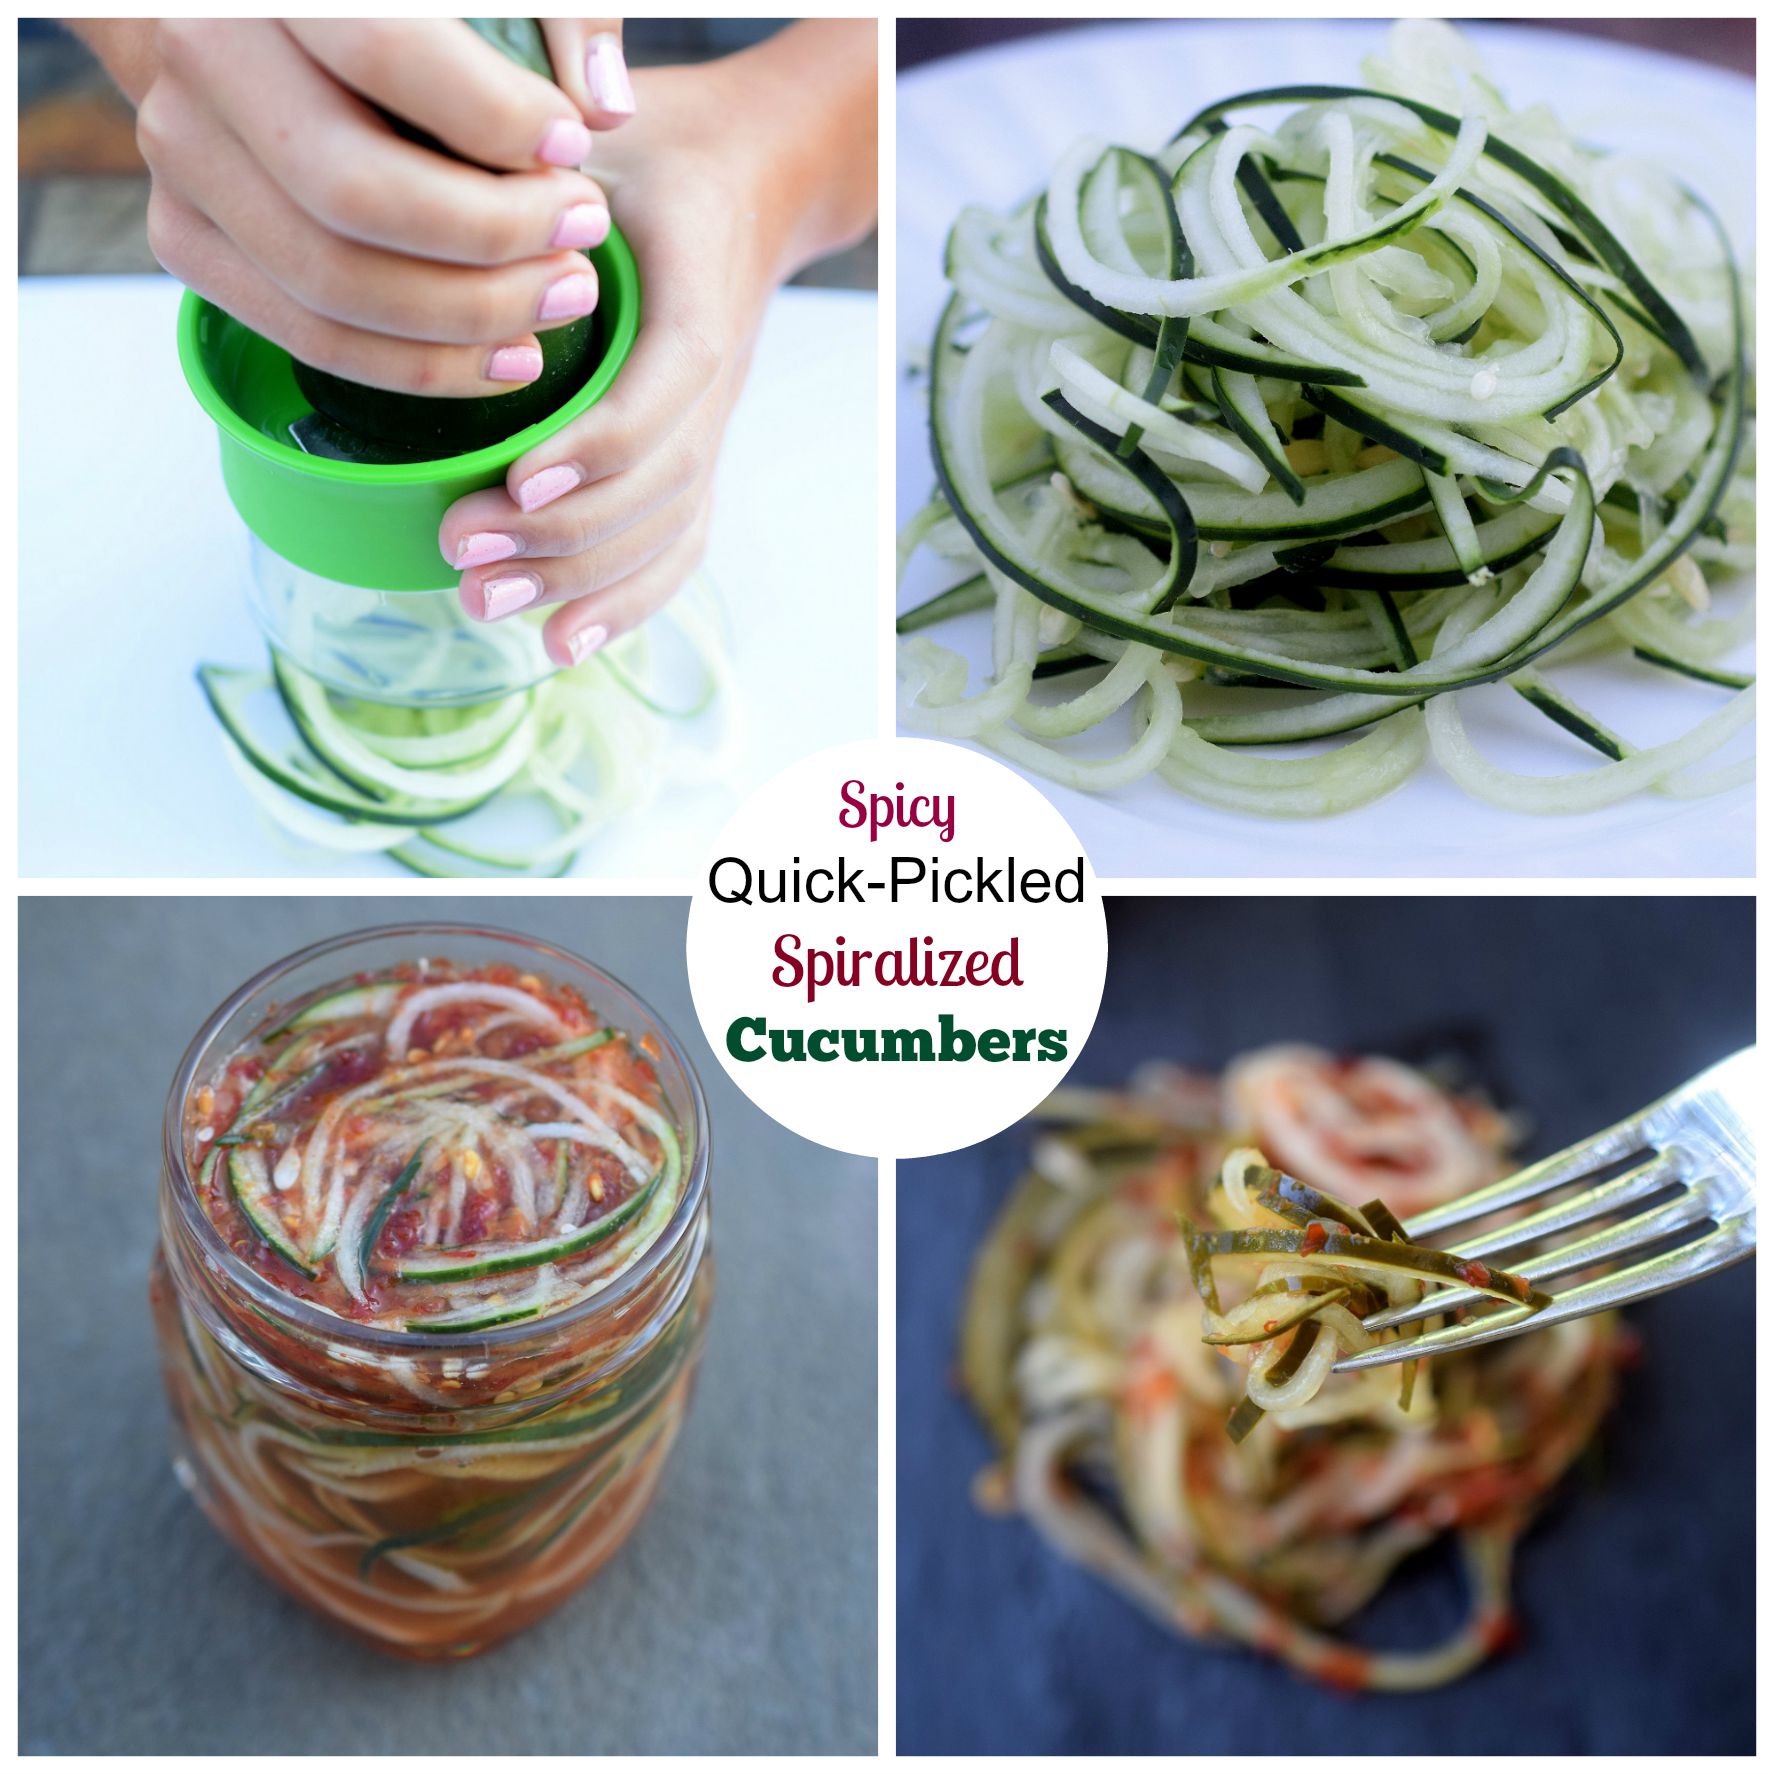 https://soufflebombay.com/wp-content/uploads/2015/08/Spicy-Quick-Pickled-Spiralized-Cucumbers.jpg